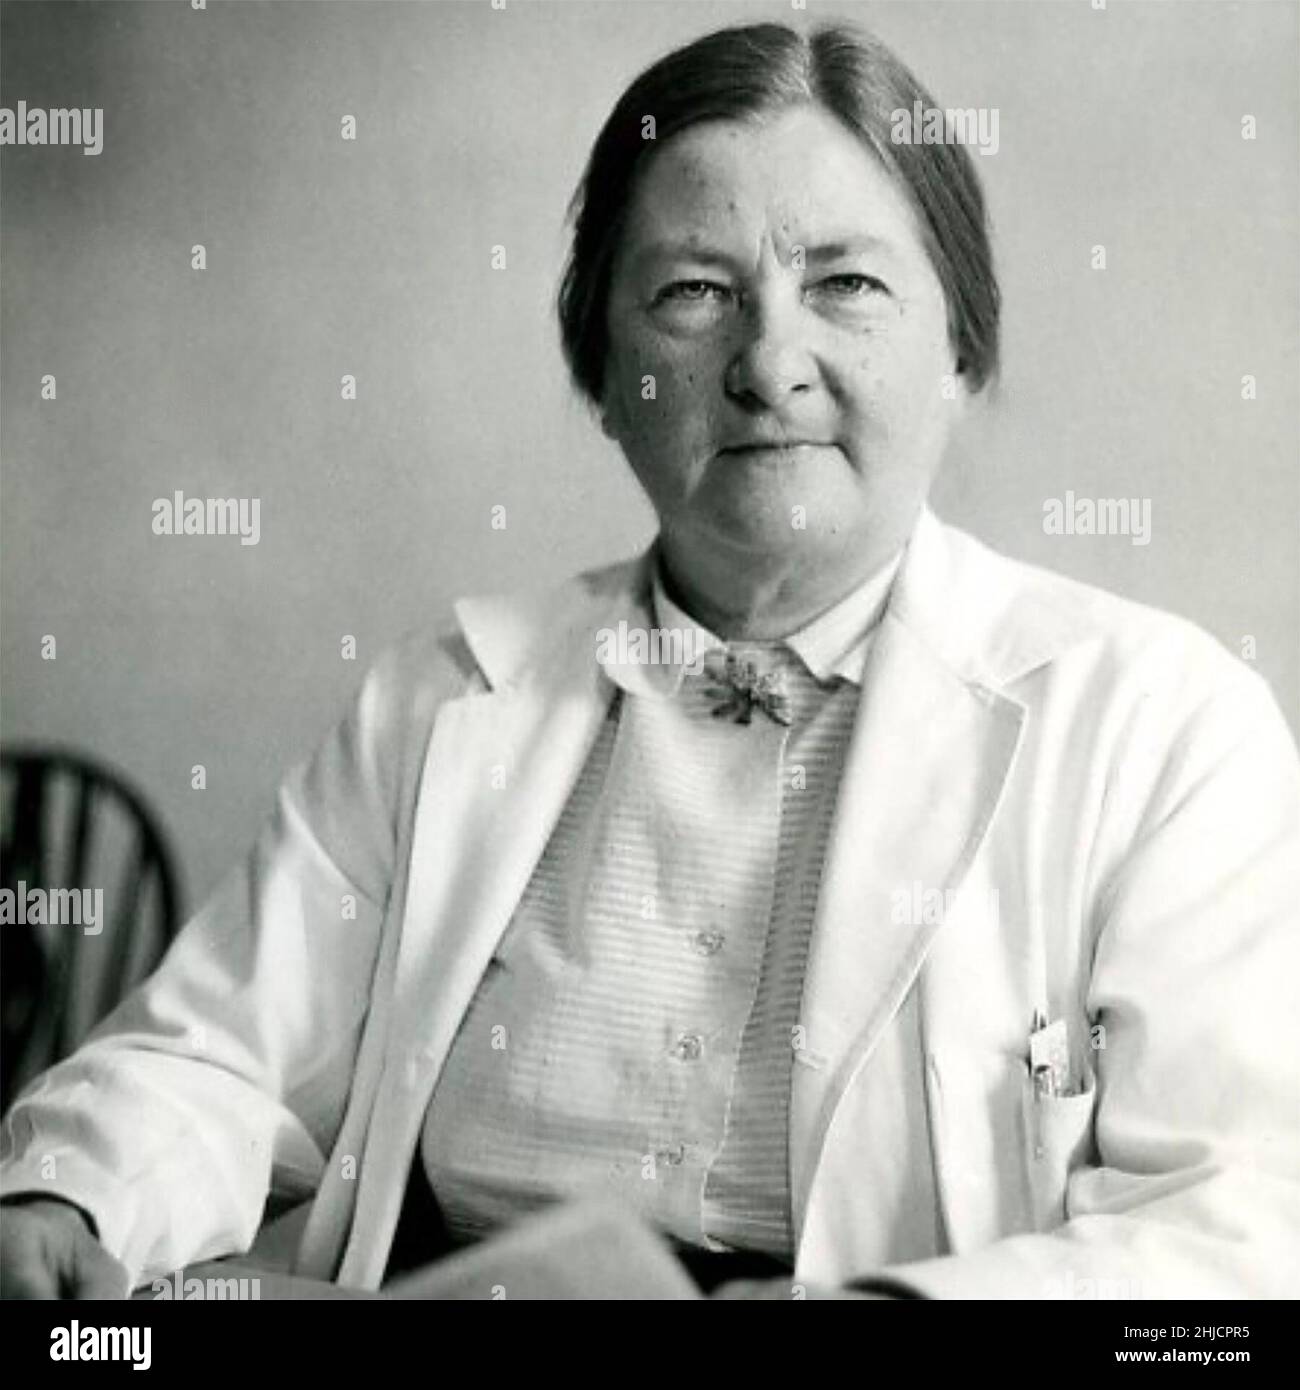 Dorothy Hansine Andersen (1901-1963) was an American pediatrician and pathologist who was the first to identify and name the disease of cystic fibrosis, which she did in 1939. She won the E. Mead Johnson Award (1939), the Elizabeth Blackwell Award (1952), and was inducted into the National Women's Hall of Fame (2002). Photo, c. 1950s. Stock Photo